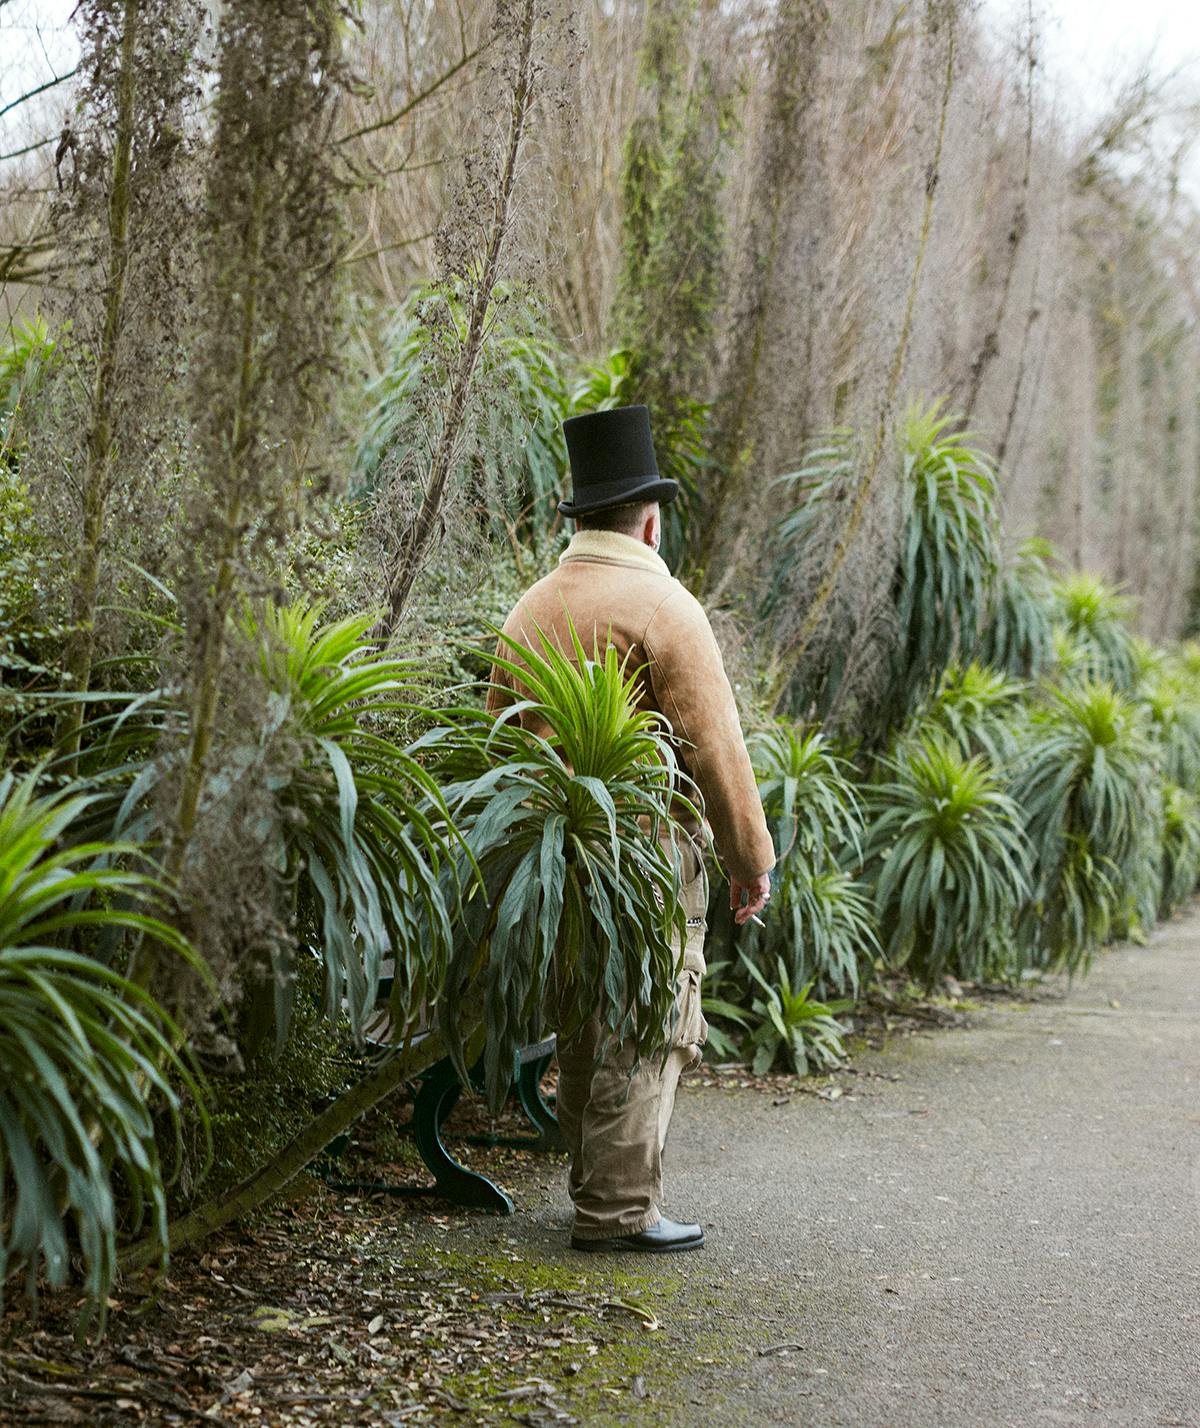 Photograph of a person from behind wearing a top hat and concealed partially by plants by Hugh Fox